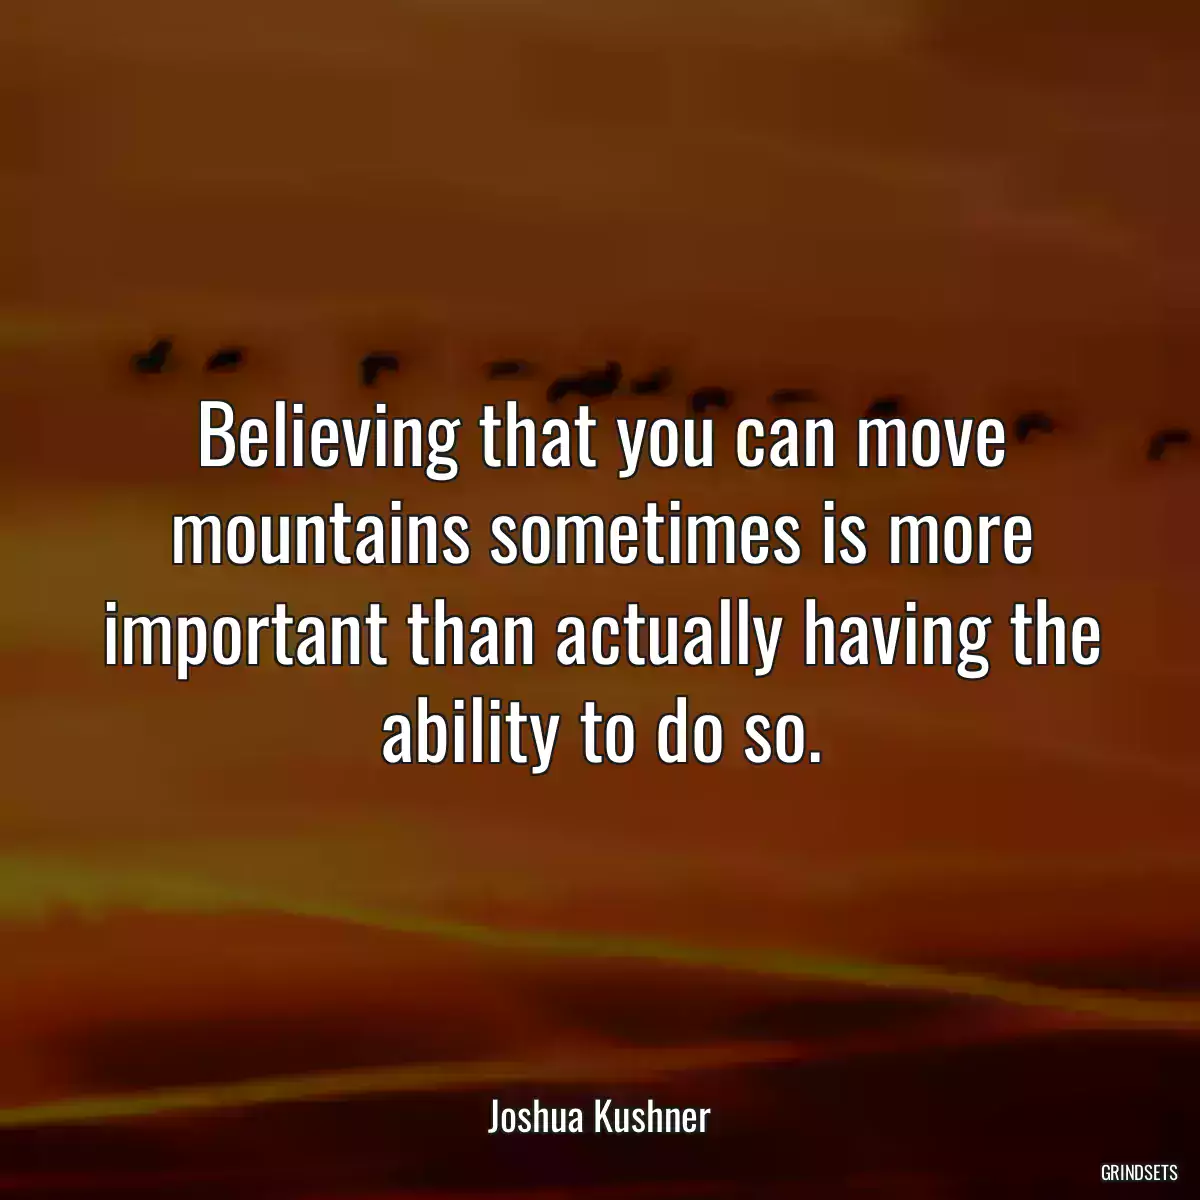 Believing that you can move mountains sometimes is more important than actually having the ability to do so.